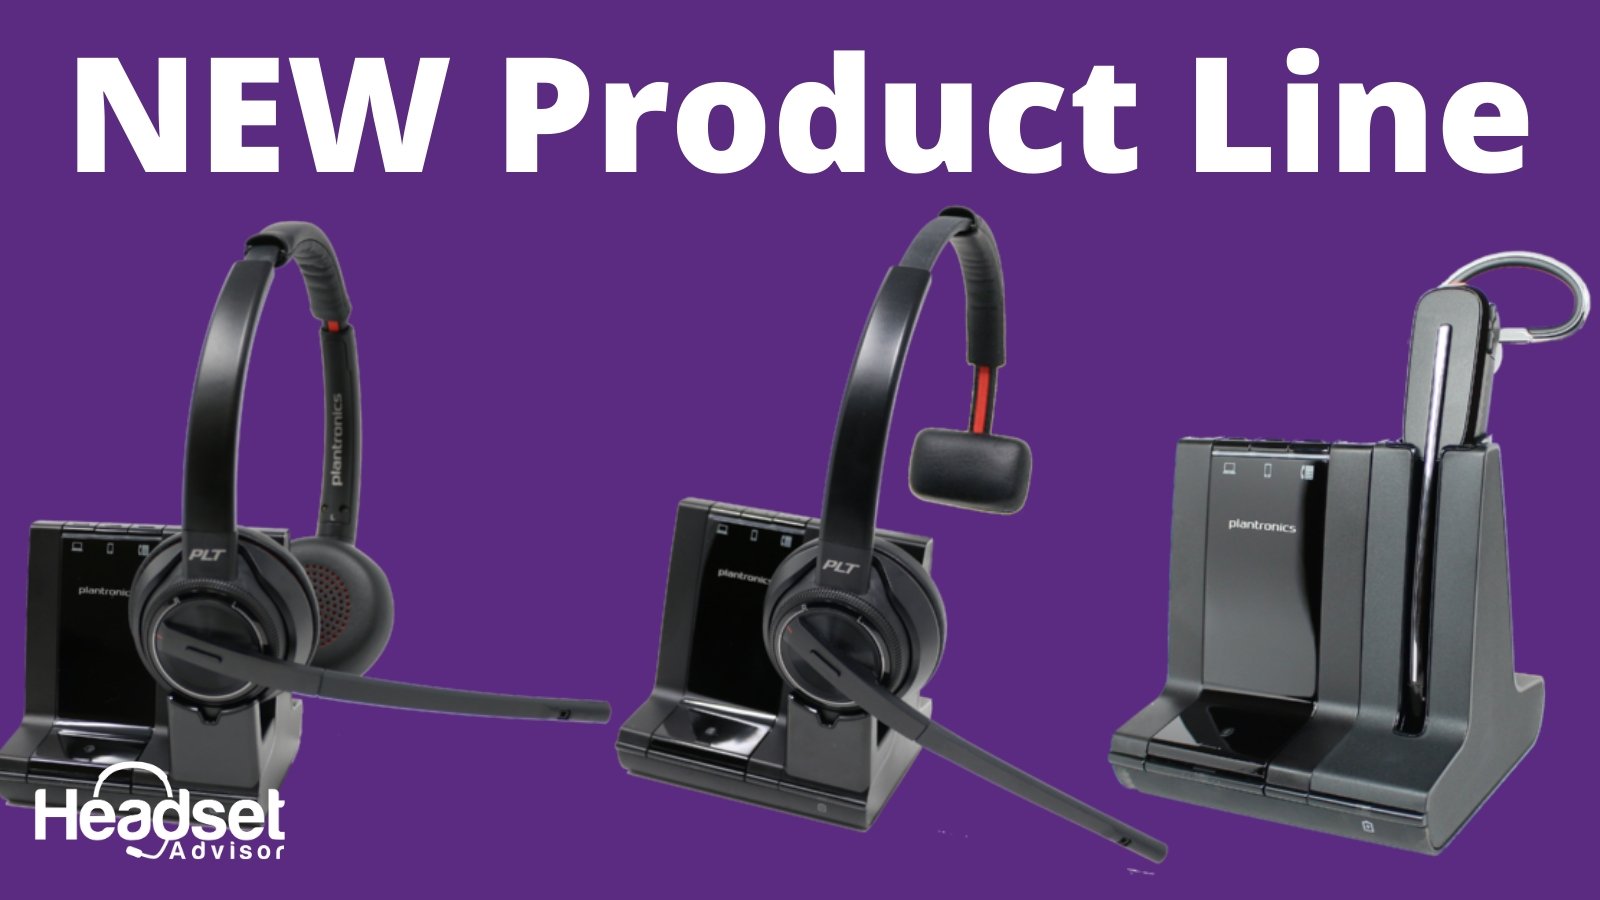 NEW -Everything You Need to Know About The Plantronics Savi 8200 Series Wireless Headset - Headset Advisor